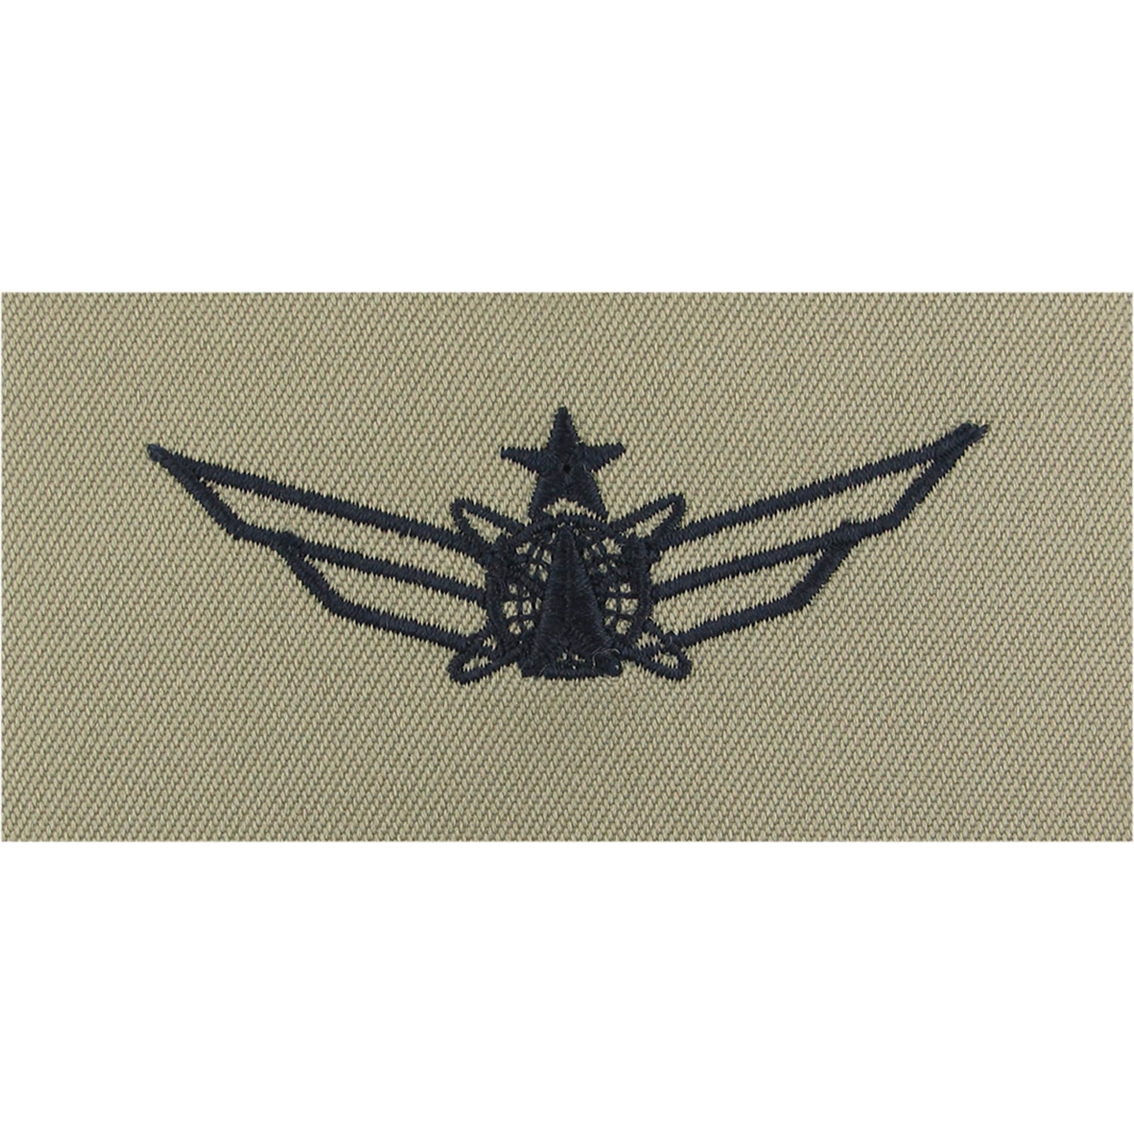 Air Force Senior Space Operations Badge, Subdued Sew-on (abu) | 1st Occupational Badge ...1134 x 1134